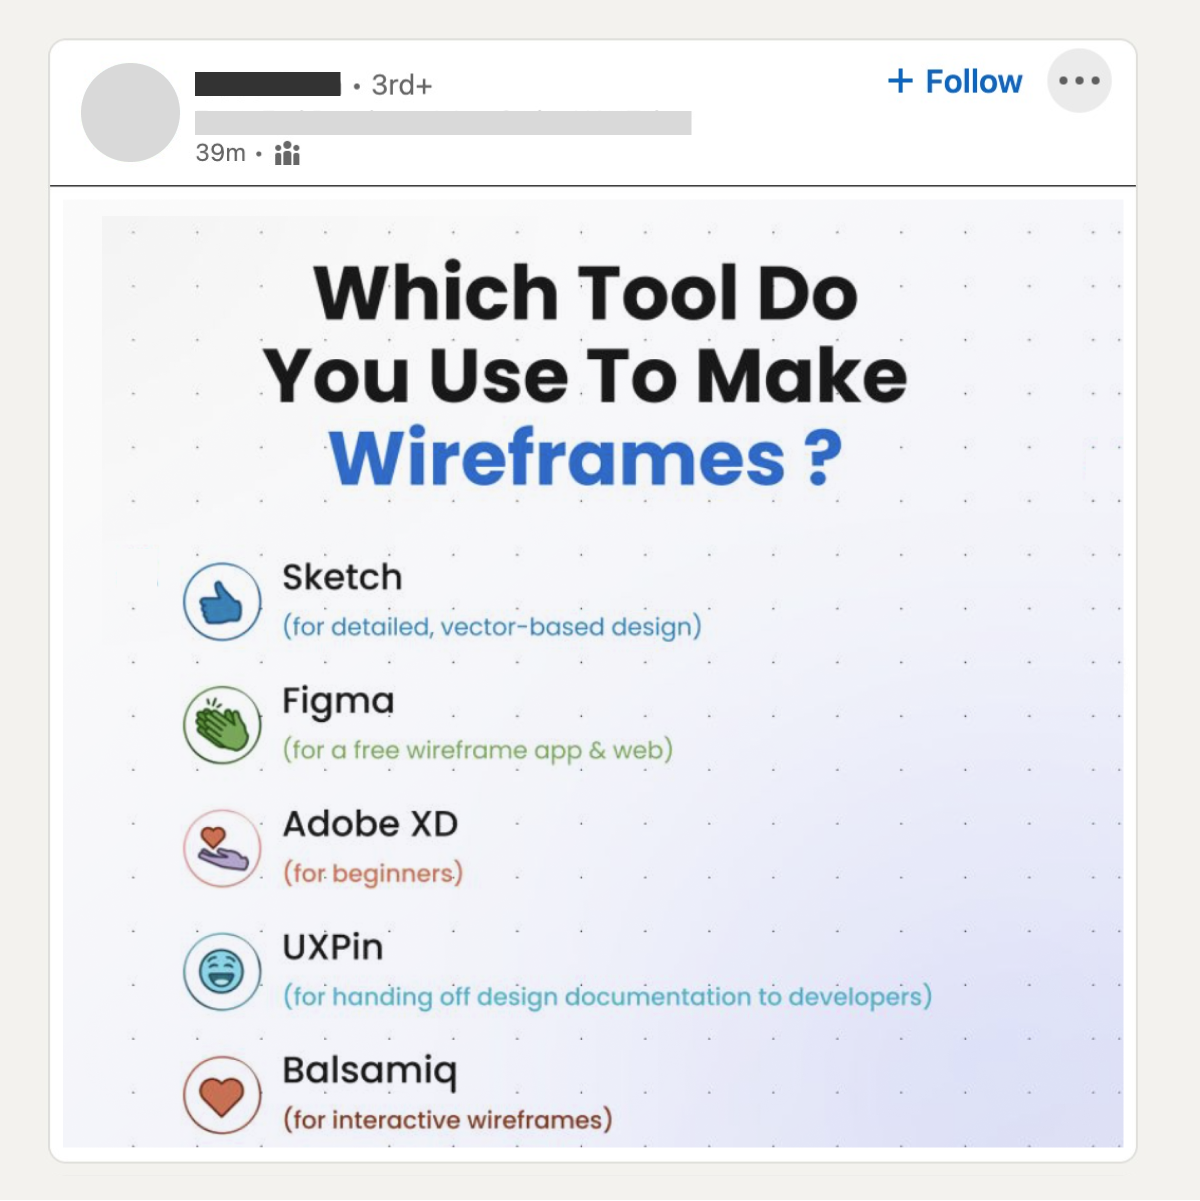 Post on Linkedin asking people to react with a different emoji based on which design tool they prefer